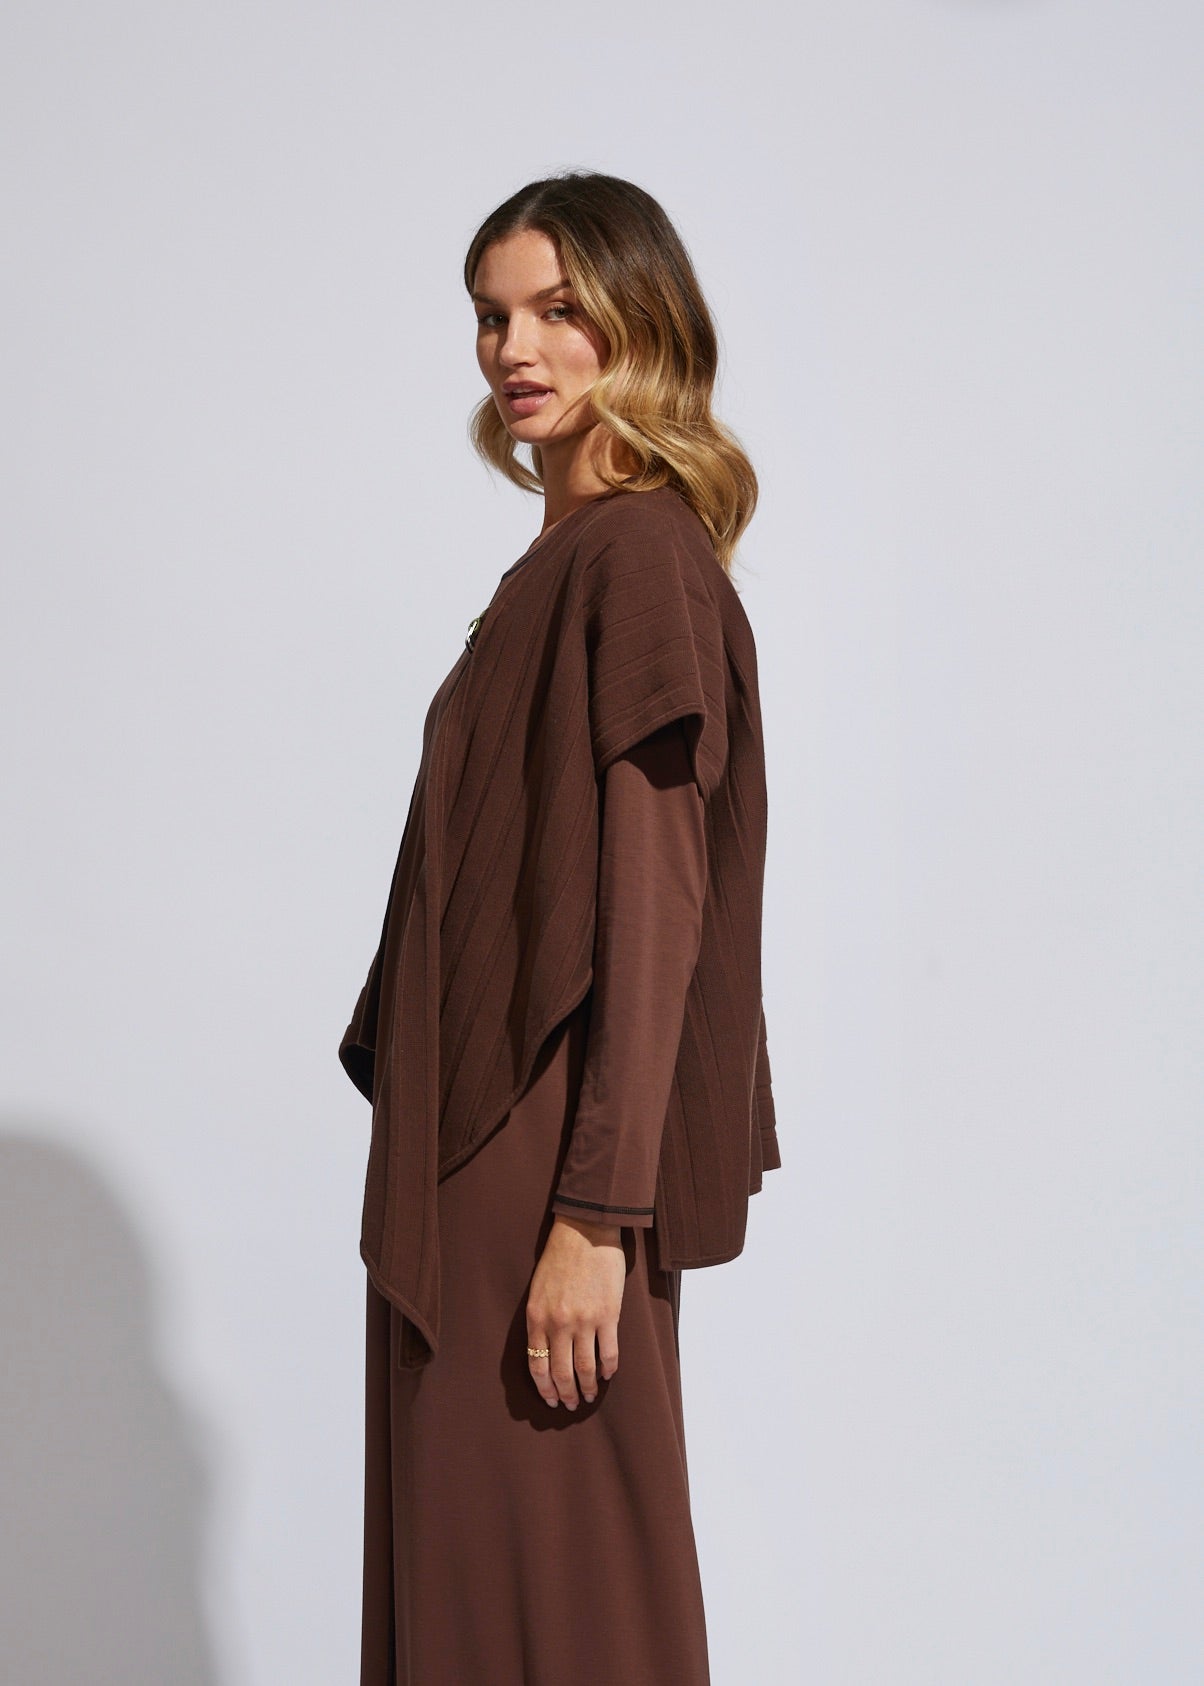 LD & CO CAPE - NUTSHELL - THE VOGUE STORE